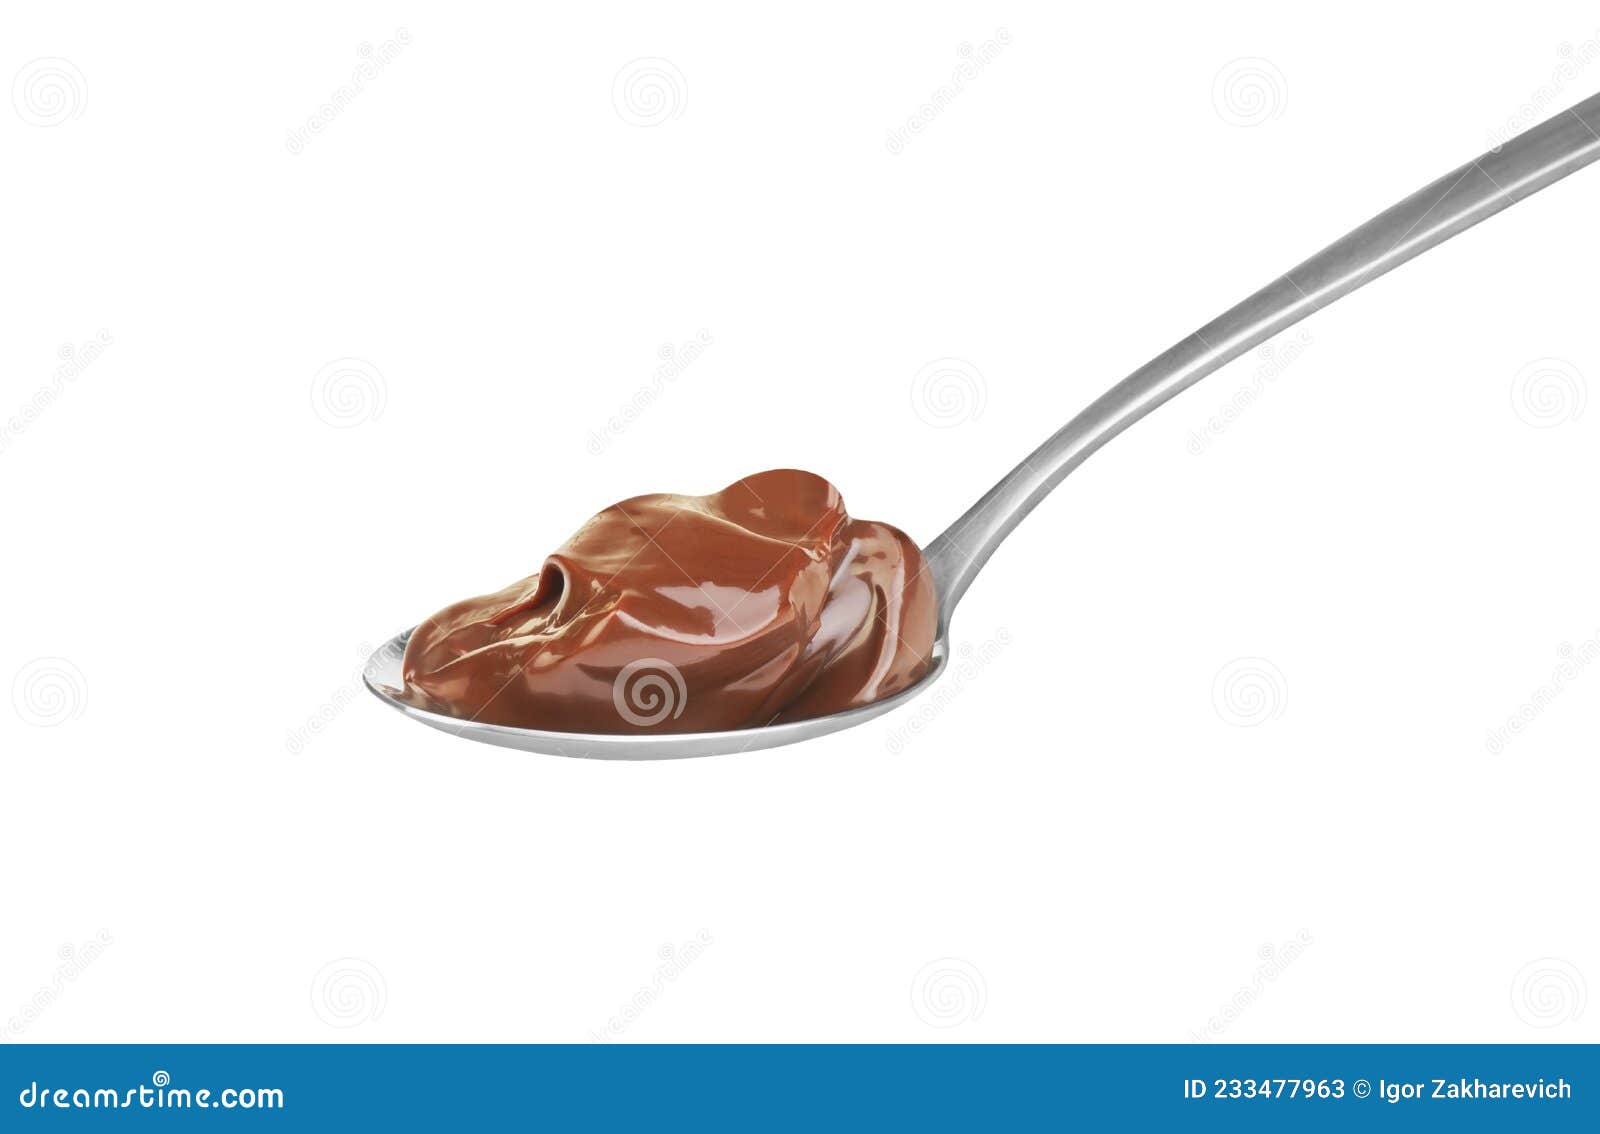 chocolate cream in spoon on white